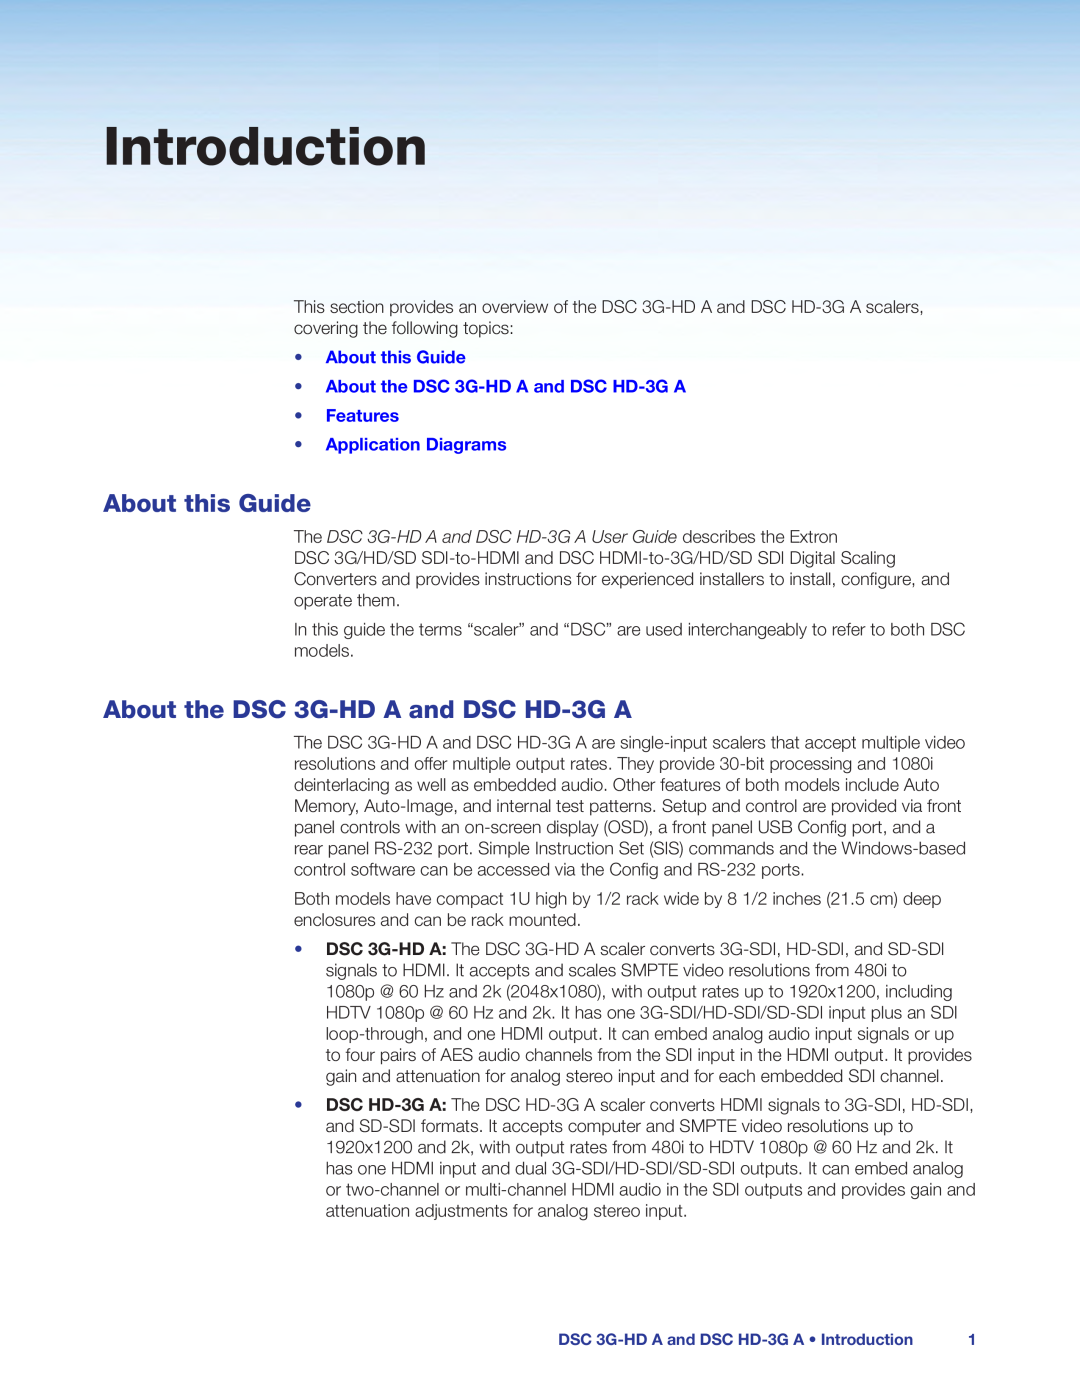 Extron electronic manual Introduction, About this Guide, About the DSC 3G-HD A and DSC HD-3G A, Application Diagrams 